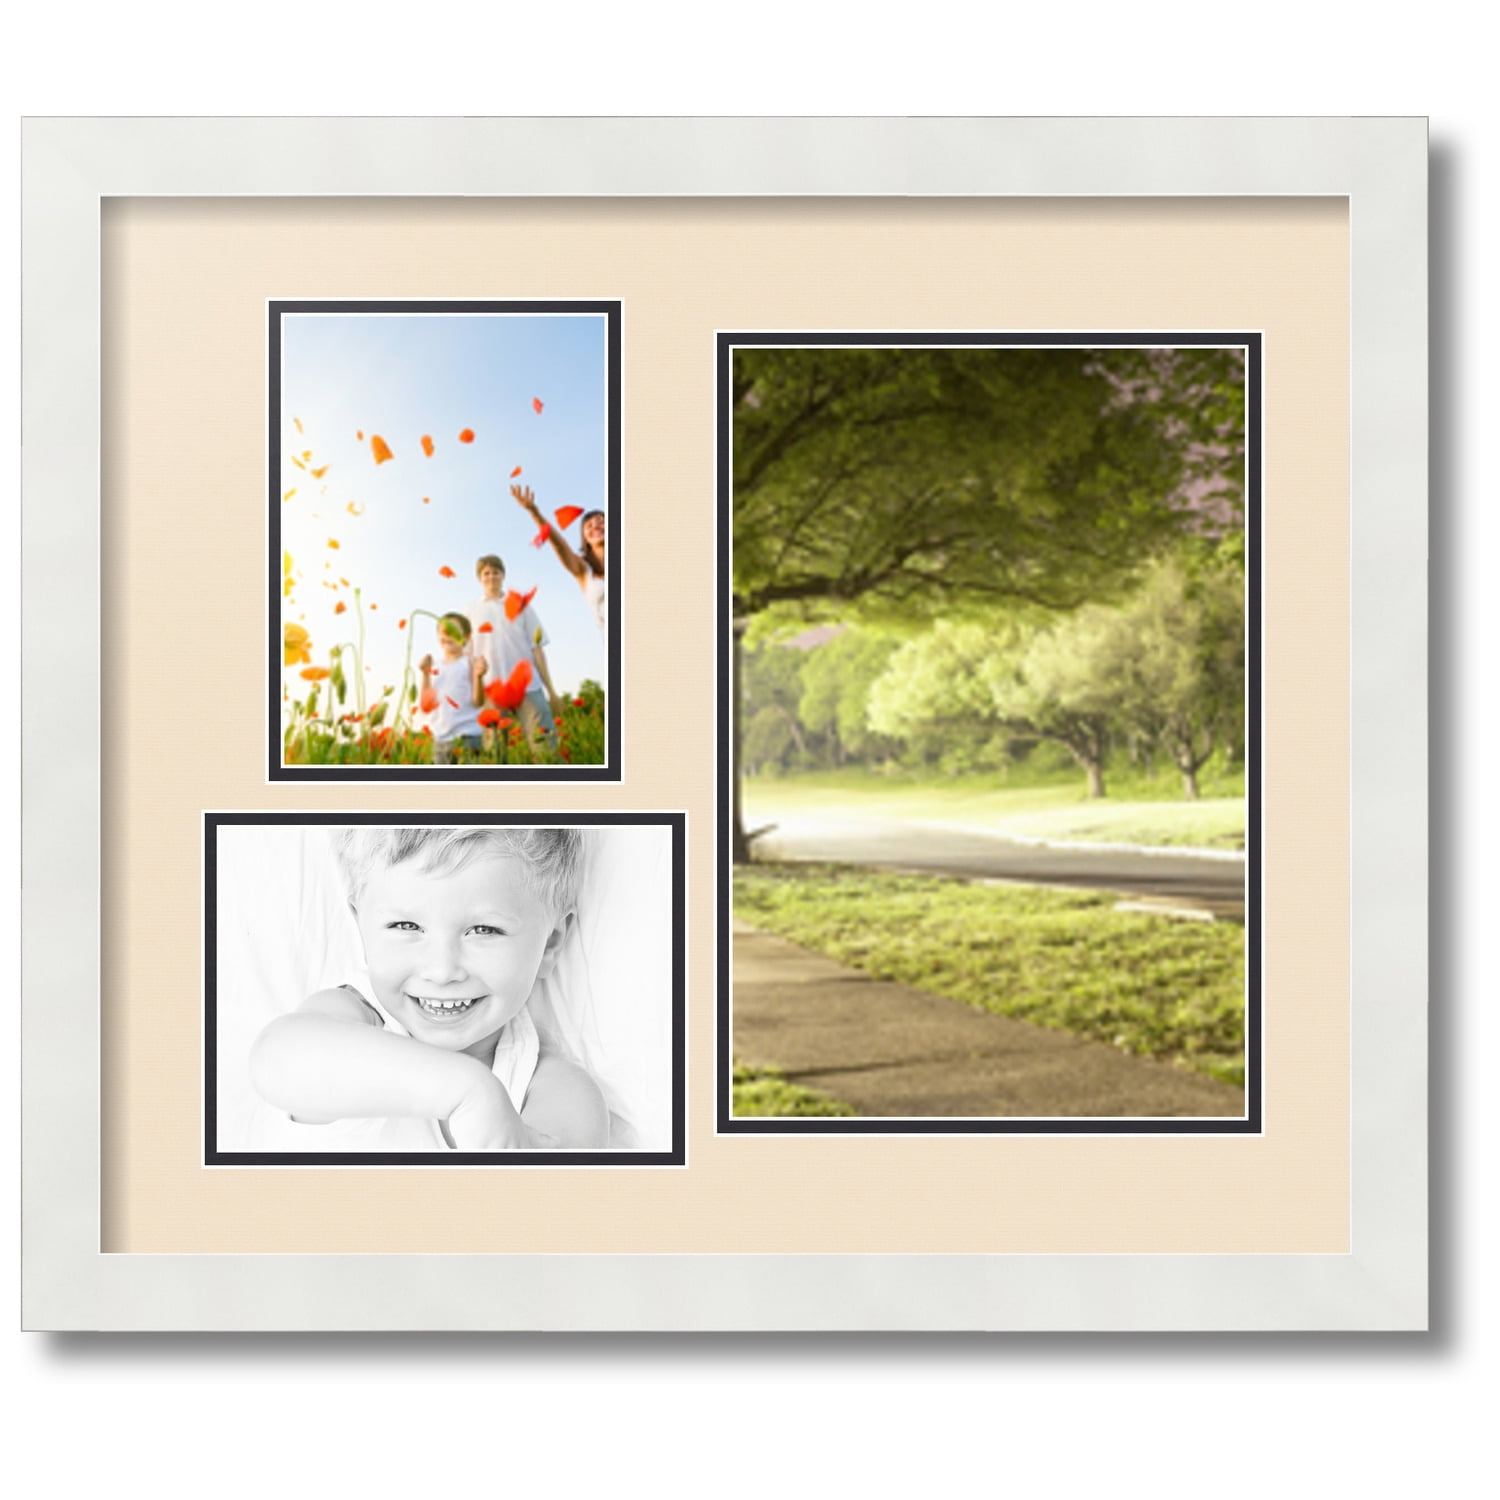 ArtToFrames Collage Photo Picture Frame with 1 - 8x10 and 2 - 5x7